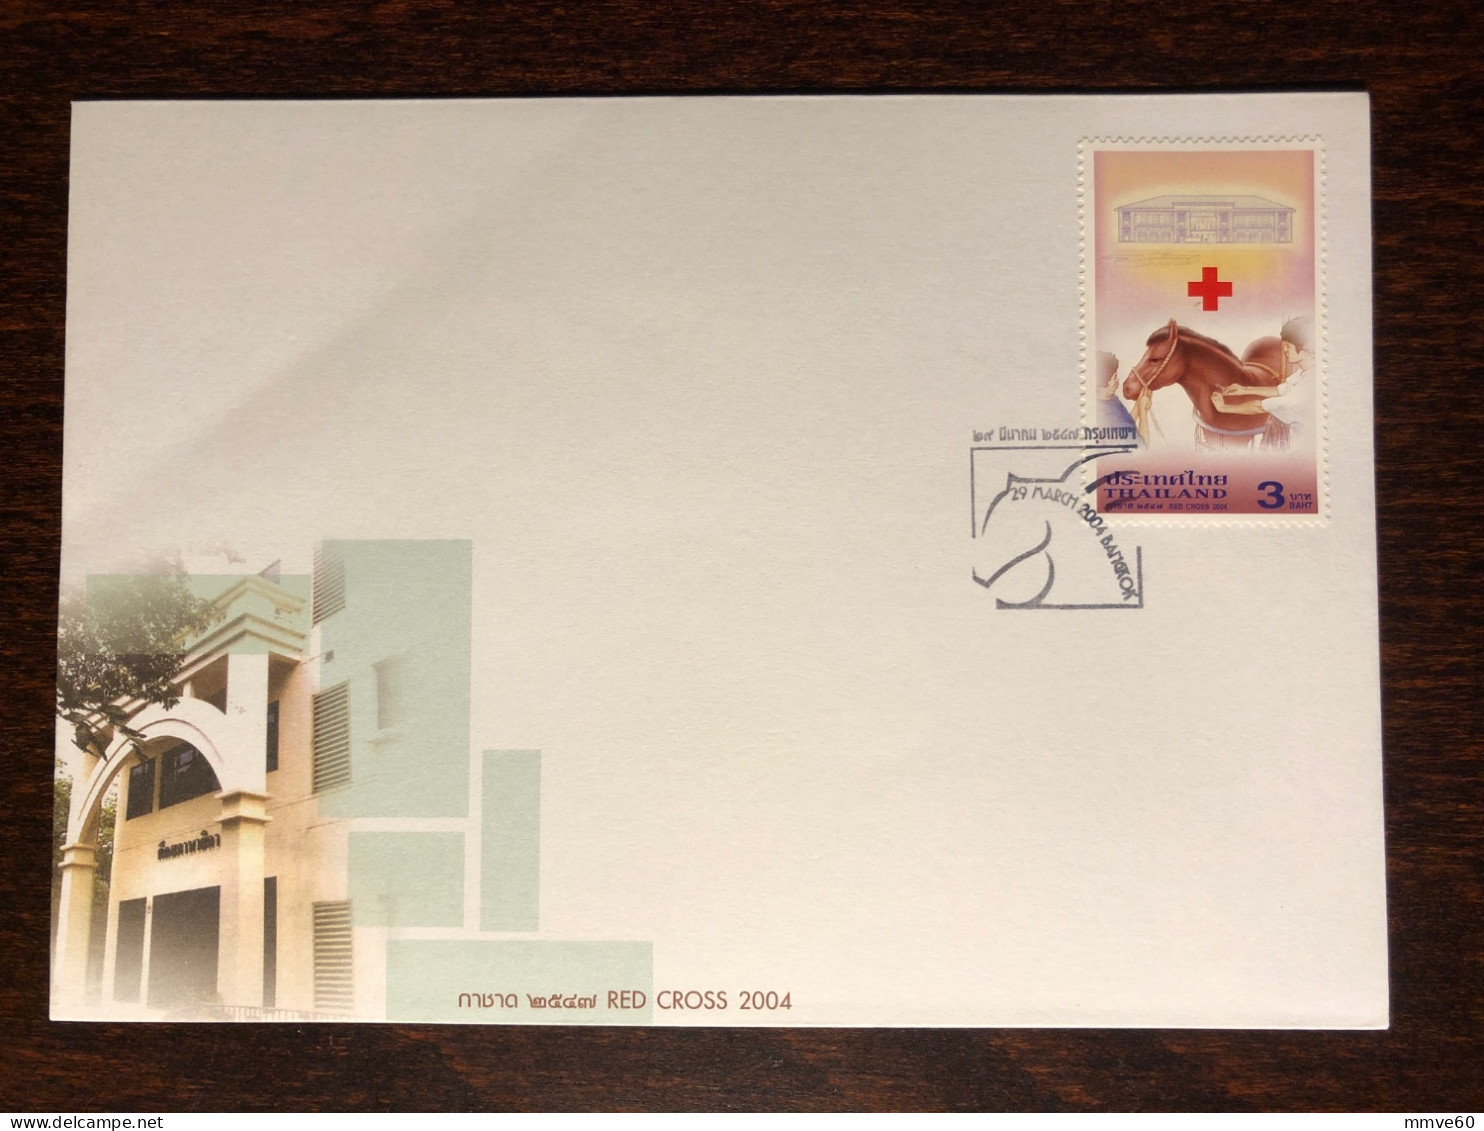 THAILAND FDC COVER 2004 YEAR RED CROSS HEALTH MEDICINE STAMPS - Thaïlande